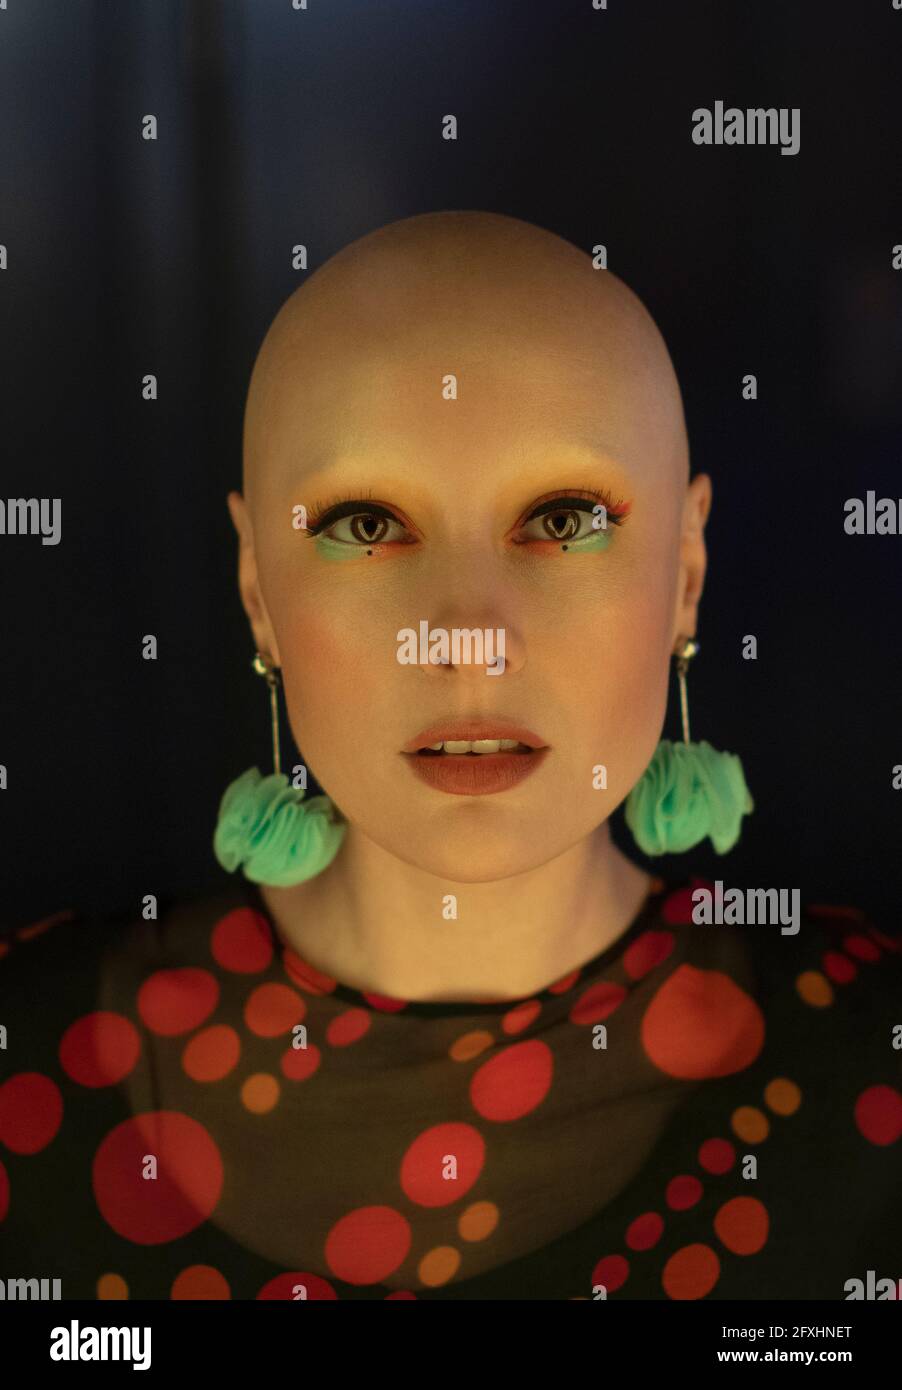 Close up portrait fashionable woman with shaved head and earrings Stock Photo